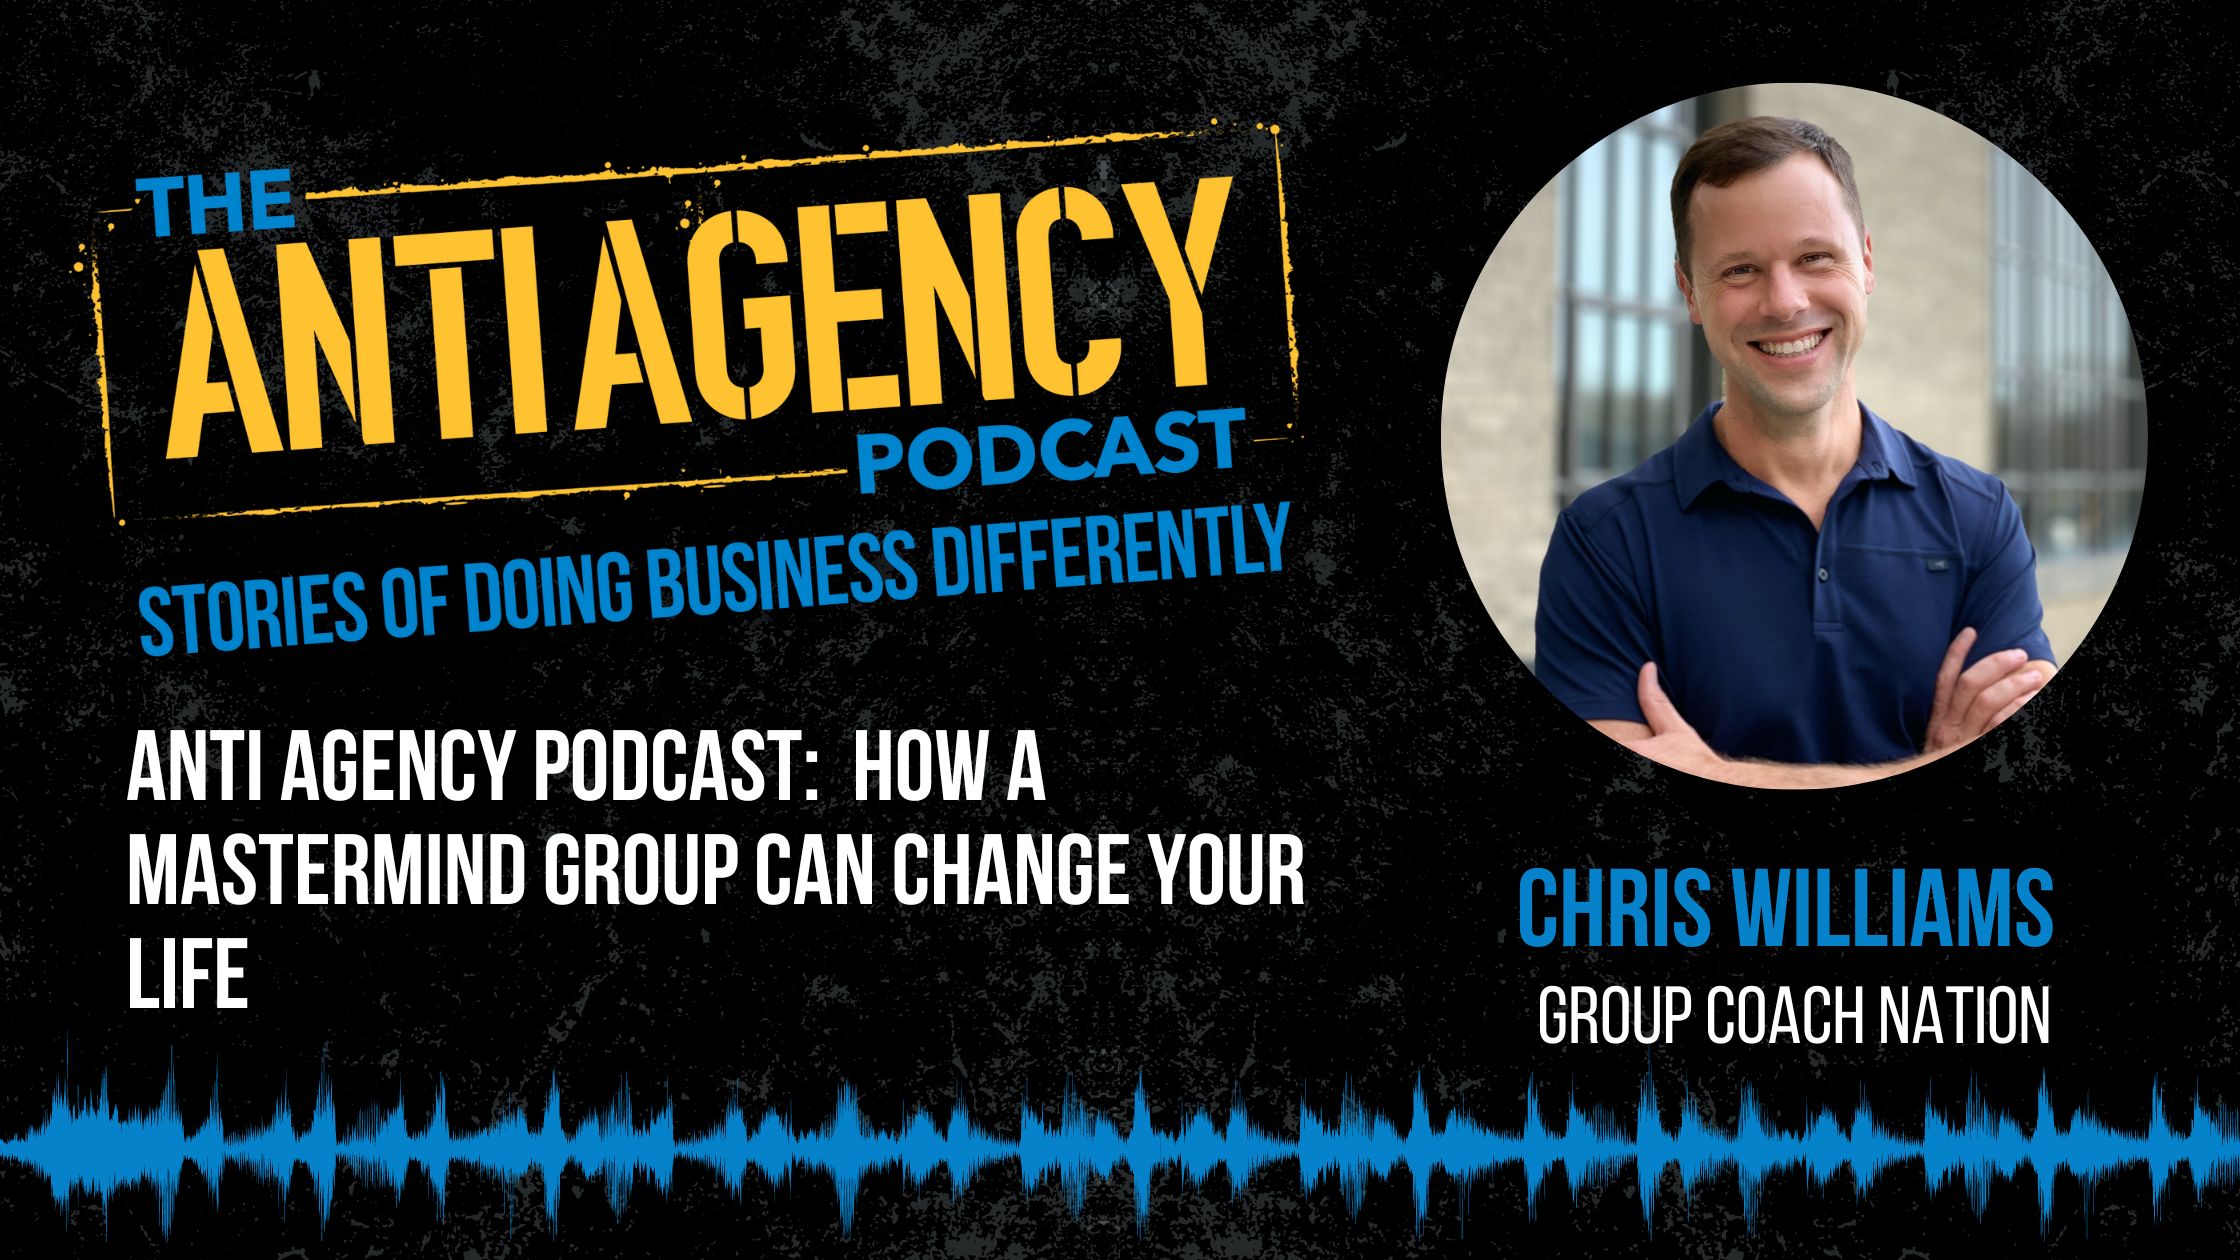 Anti Agency Podcast: How a Mastermind Group Can Change Your Life